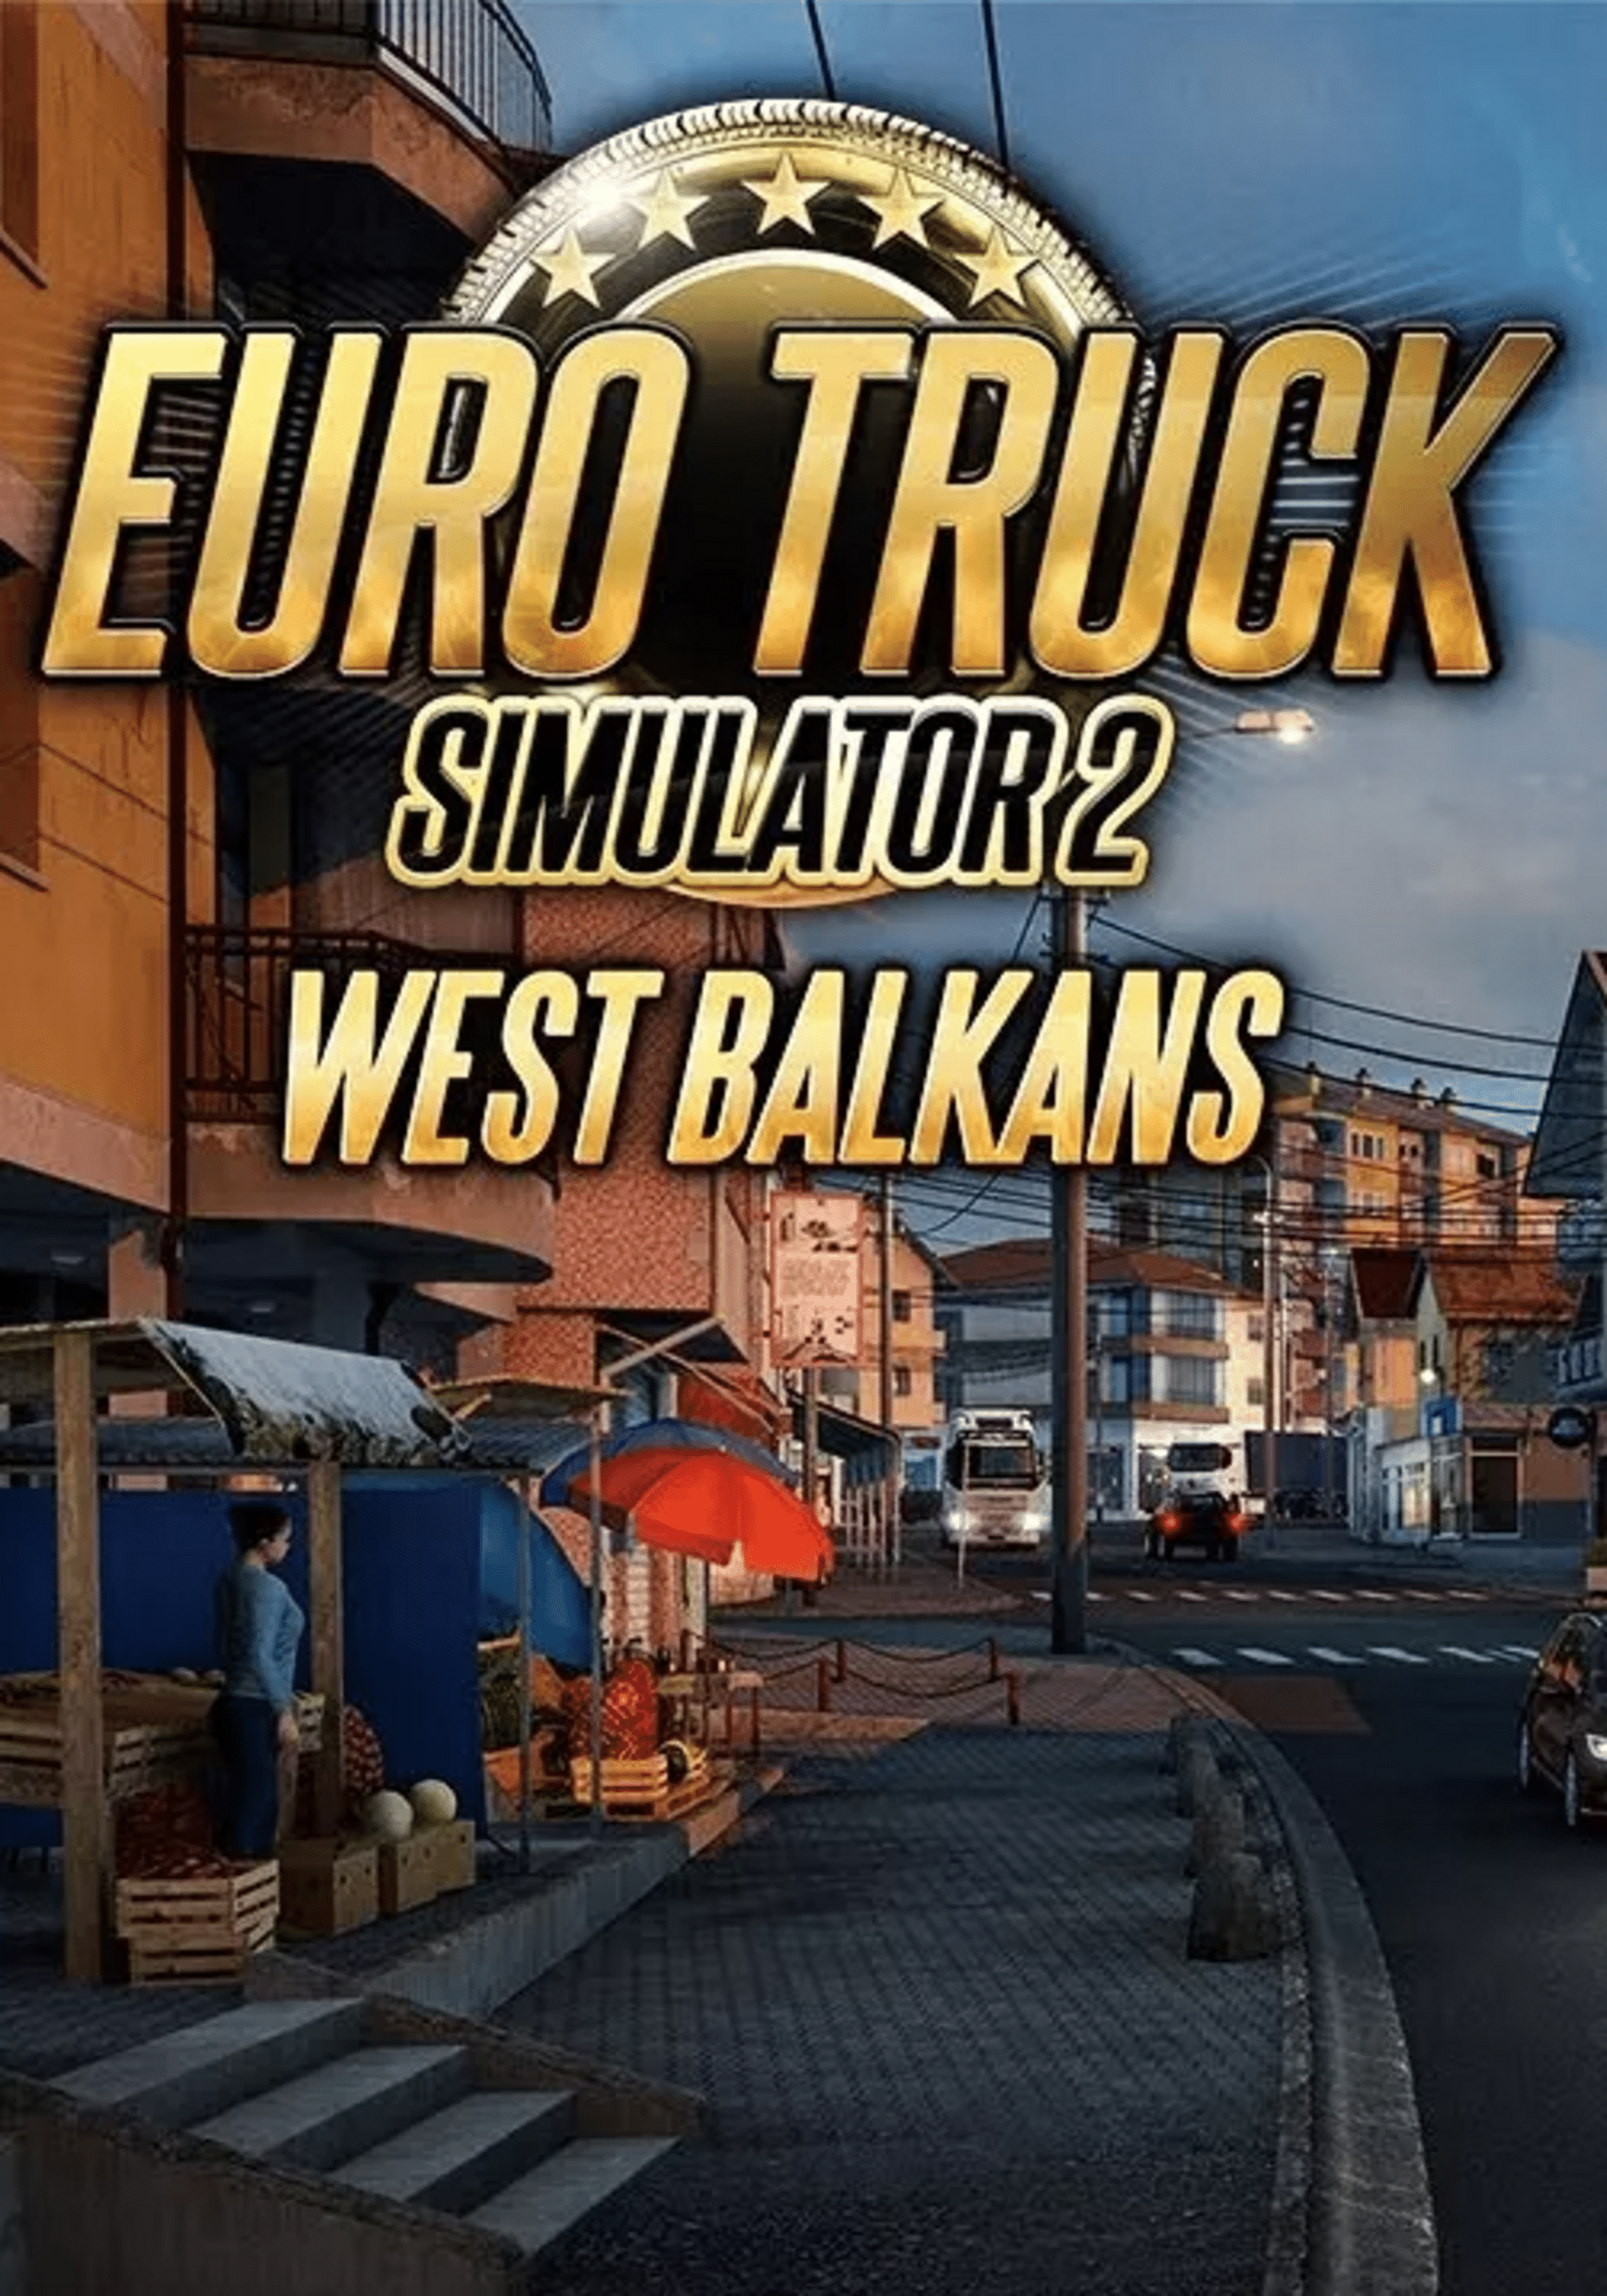 Kup produkt ON THE ROAD - The Truck Simulator